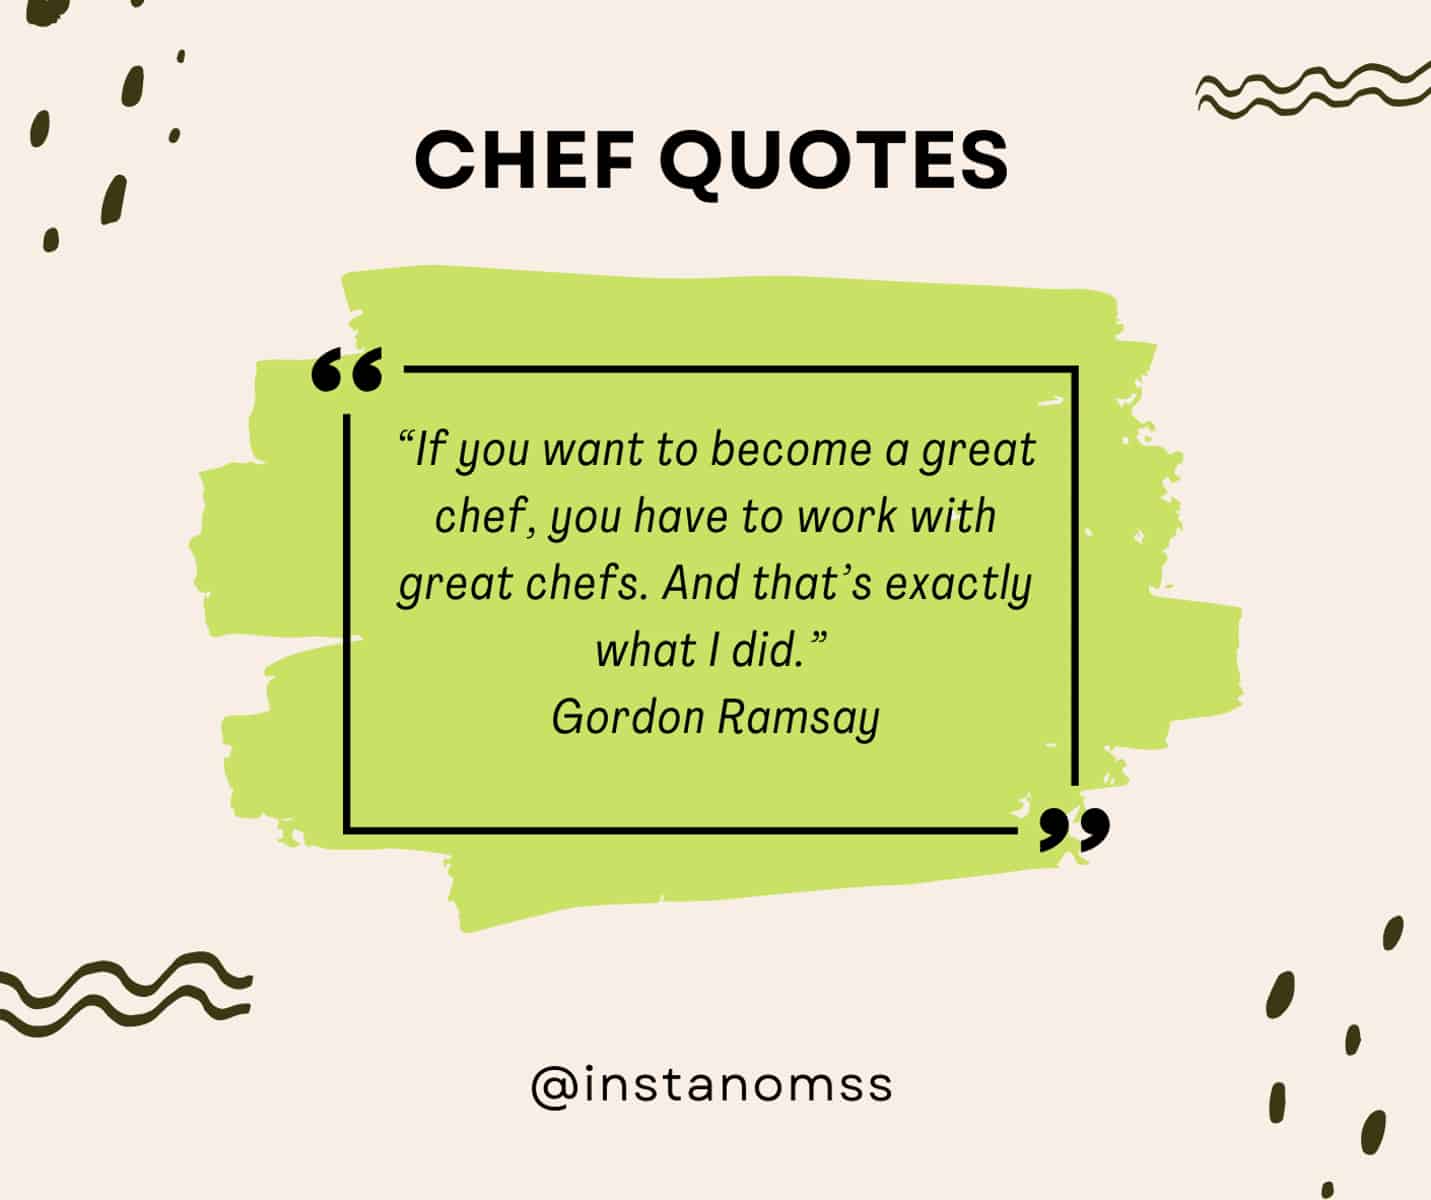 “If you want to become a great chef, you have to work with great chefs. And that’s exactly what I did.” Gordon Ramsay